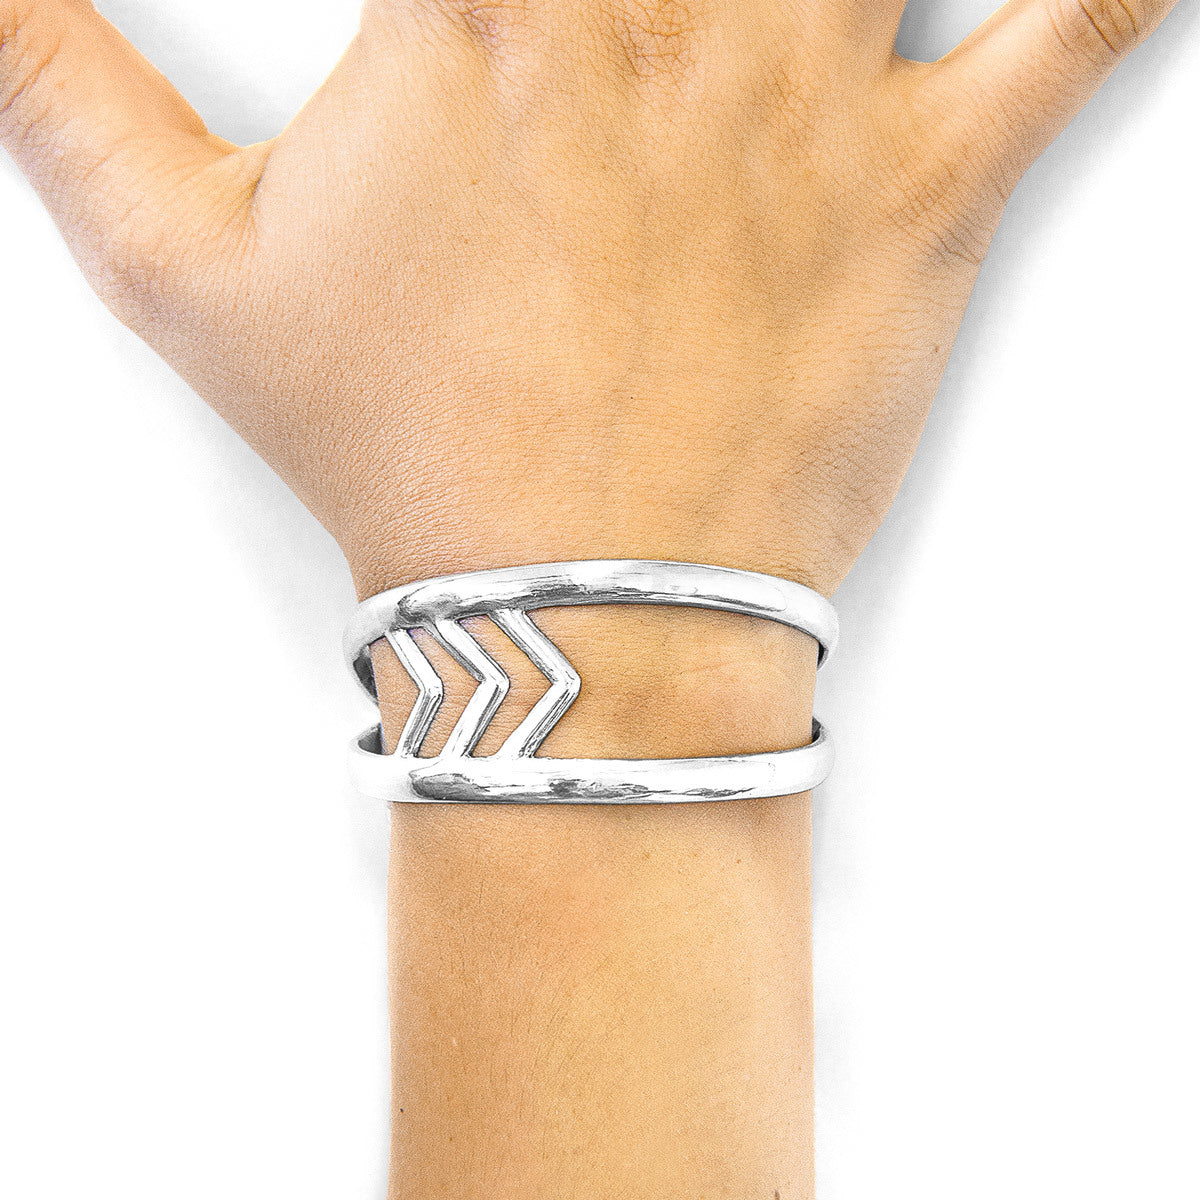 Montanita Maxi Surf Silver Bangle - Handcrafted in Great Britain with Chevron Arrows - Solid .925 Sterling Silver - One Size Fits Most - Jewelry & Watches - Bijou Her -  -  - 